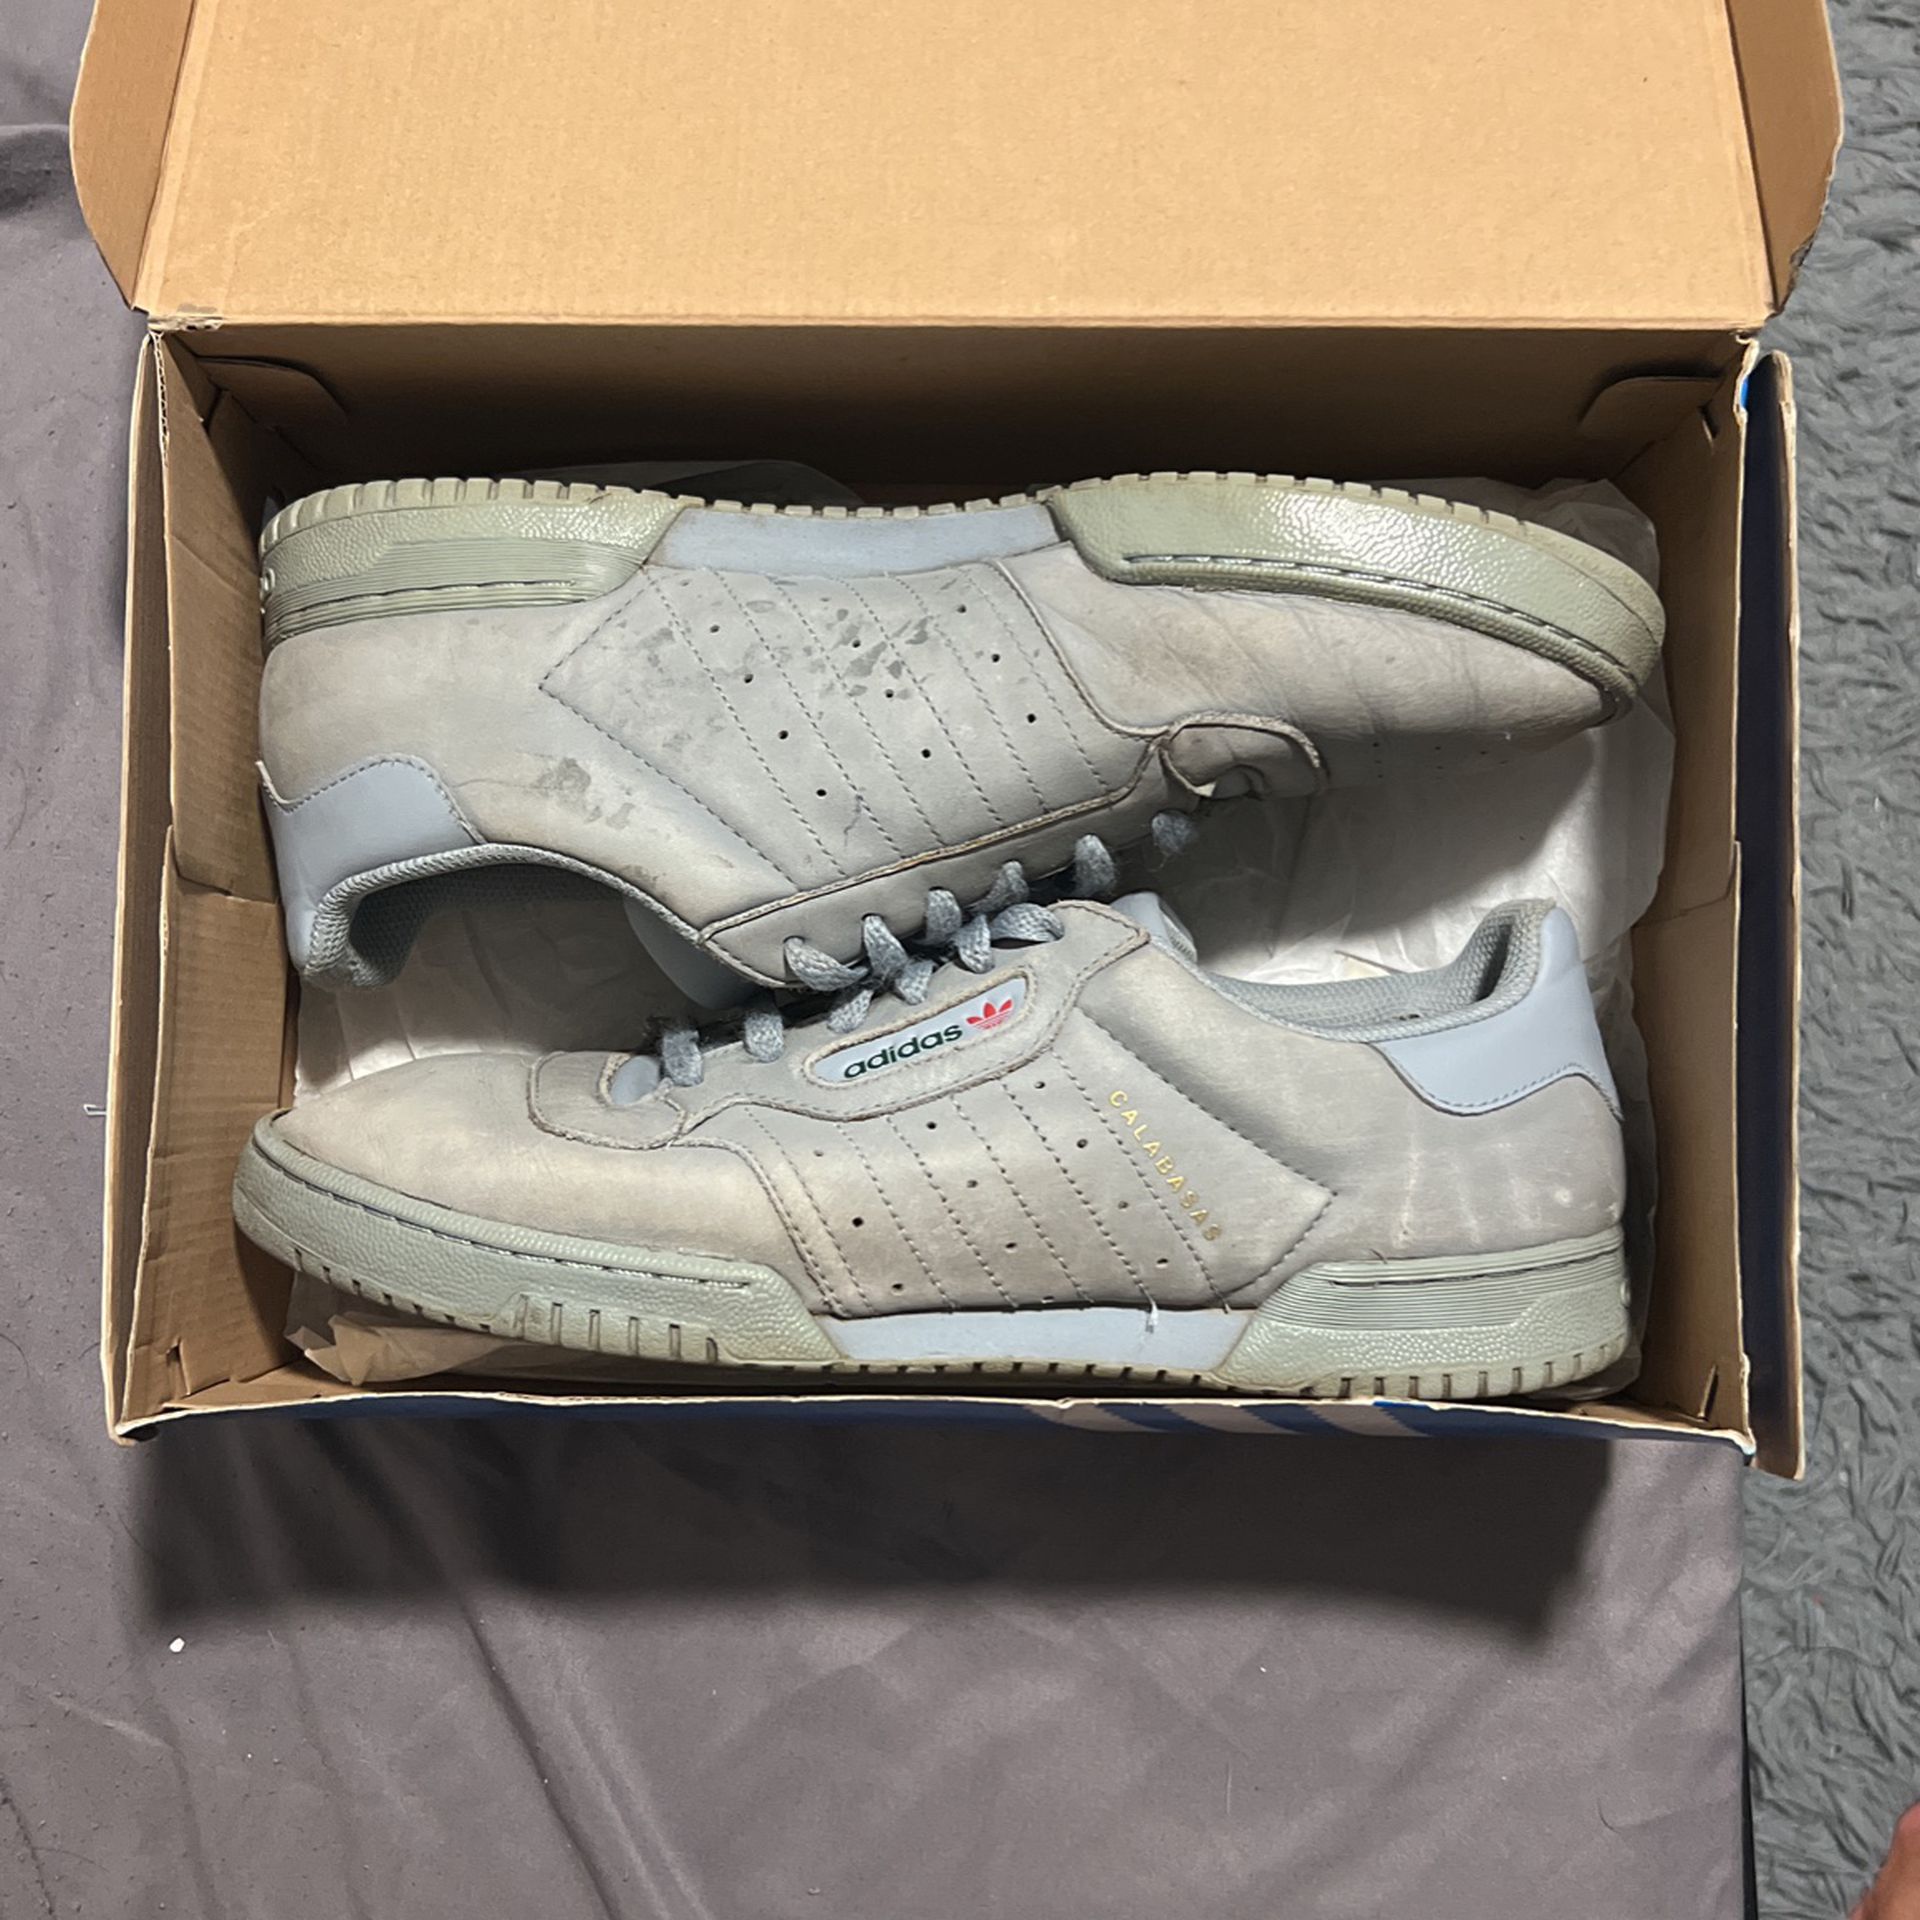 Hectare Terminal Groene achtergrond Adidas Yeezy Powerphase Size 12 for Sale in Temecula, CA - OfferUp